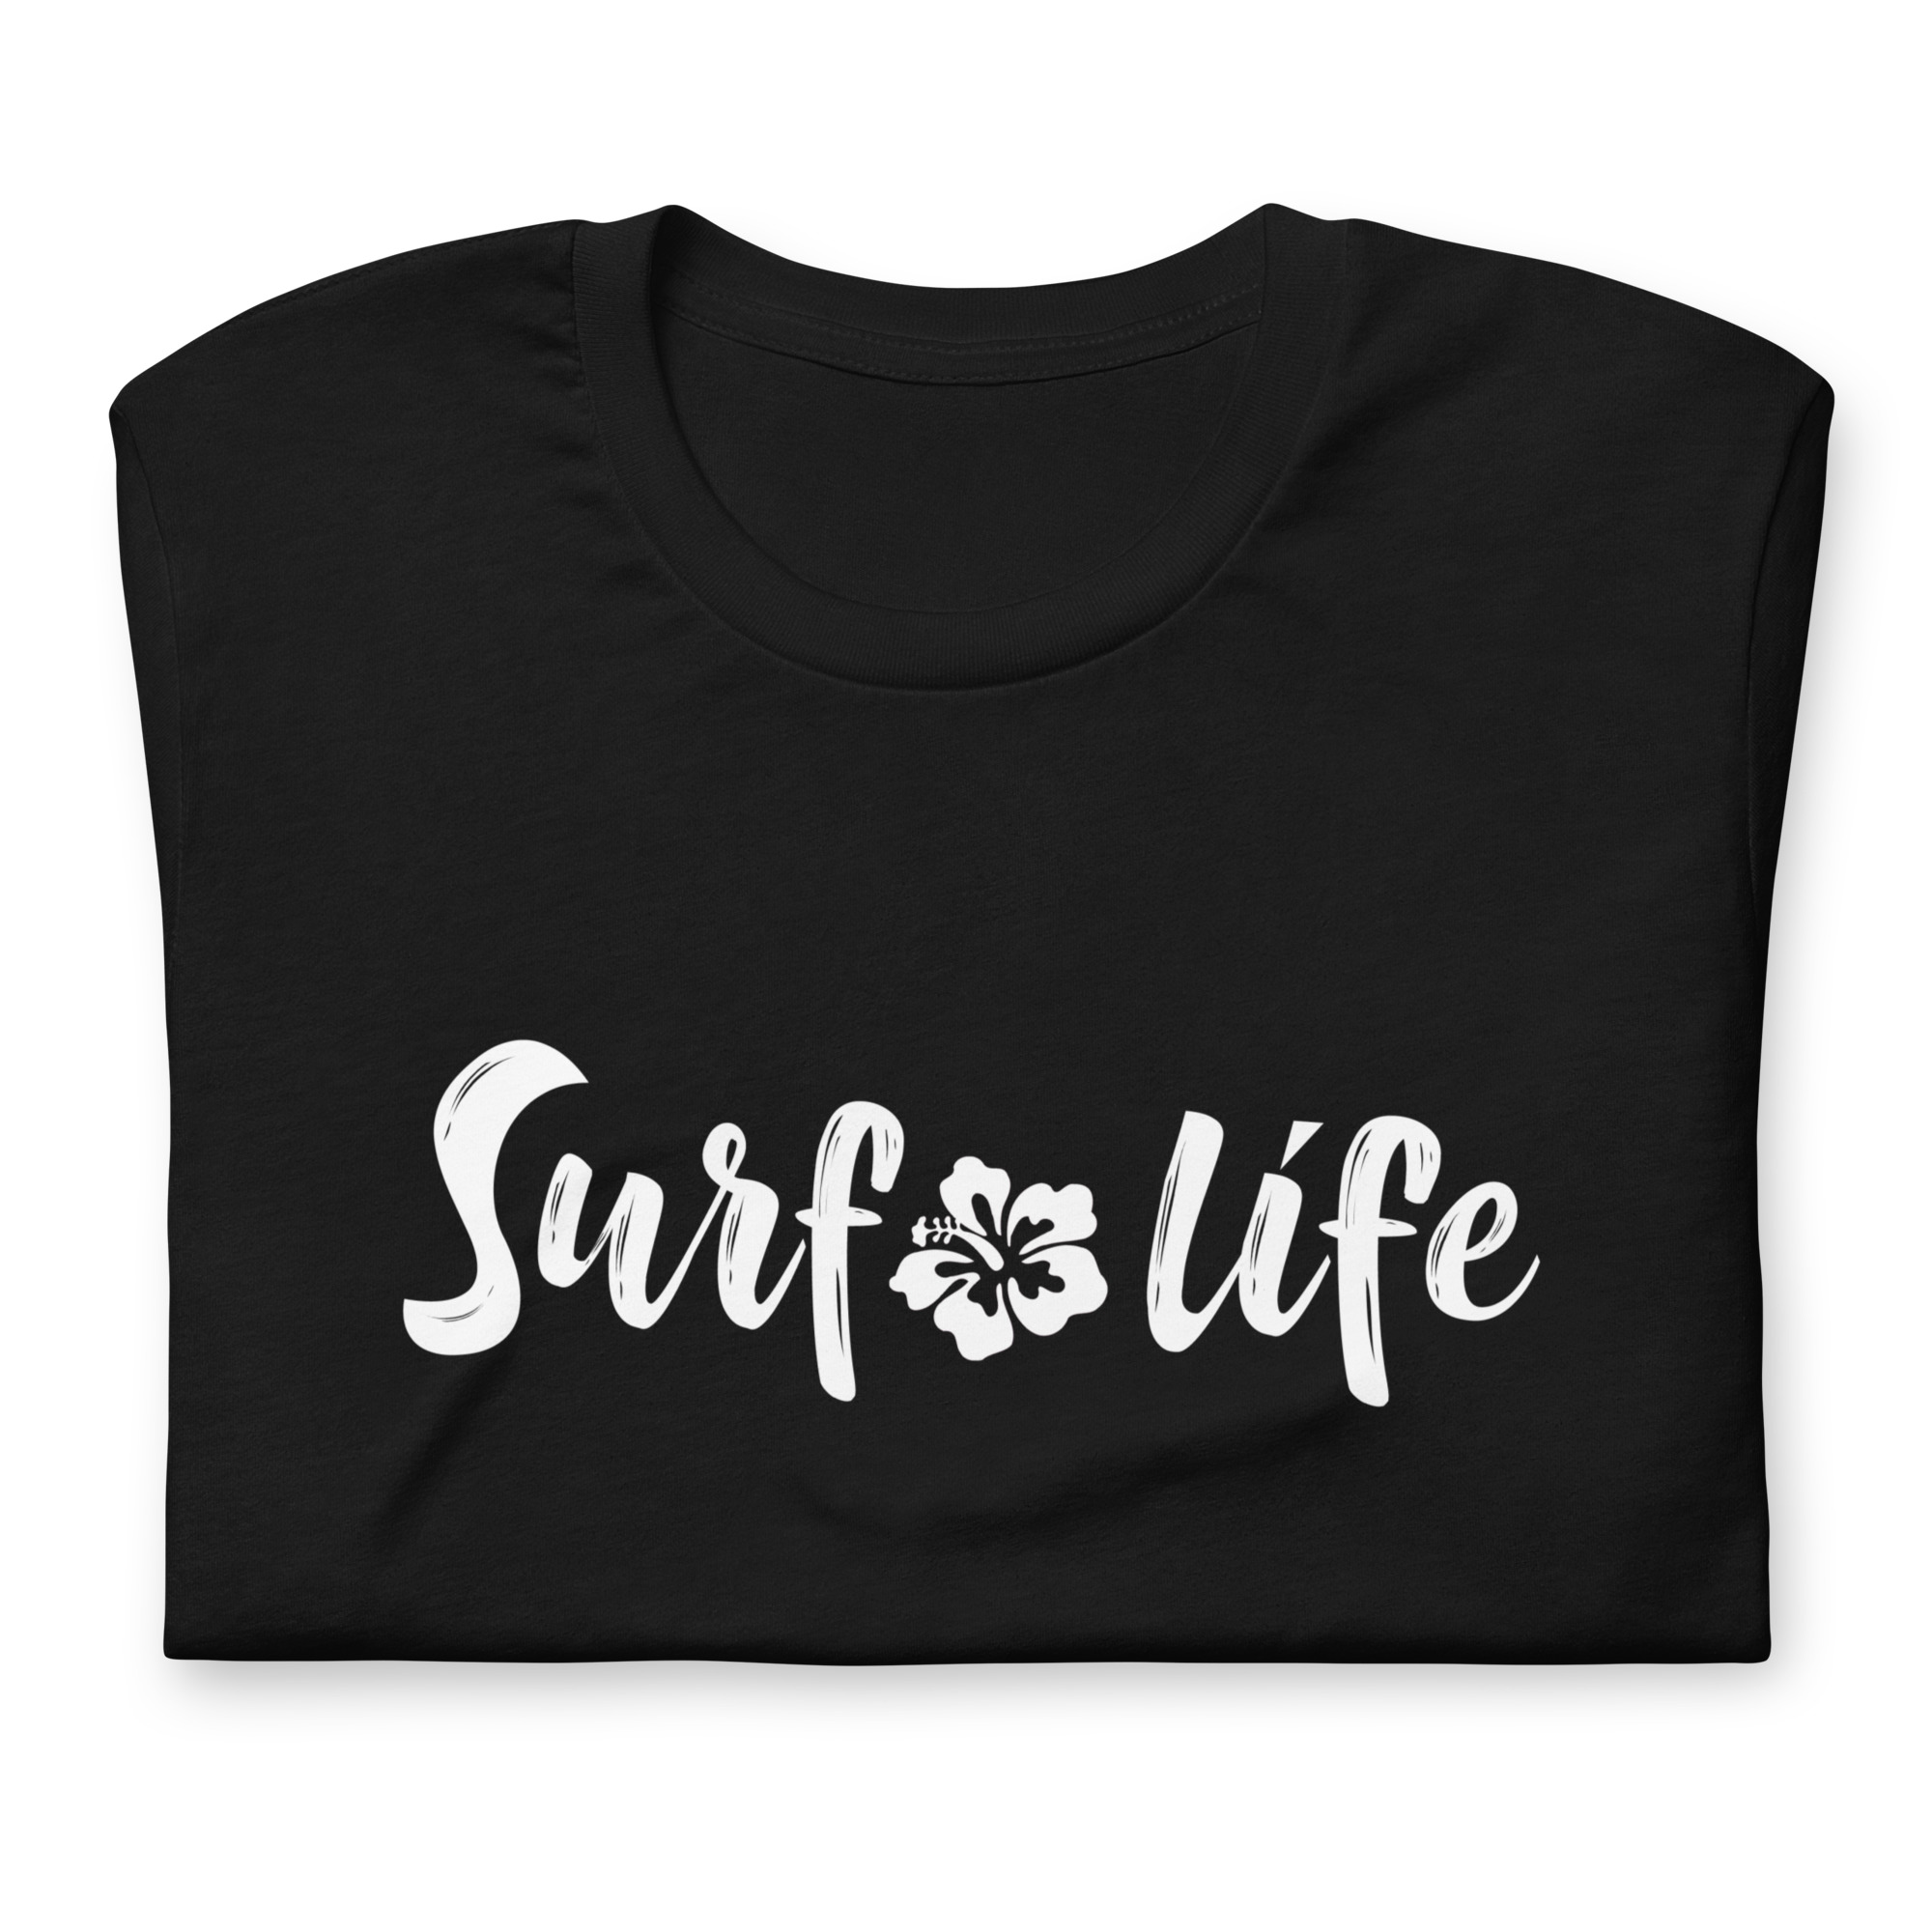 Bequemes “Surf life” Unisex-T-Shirt